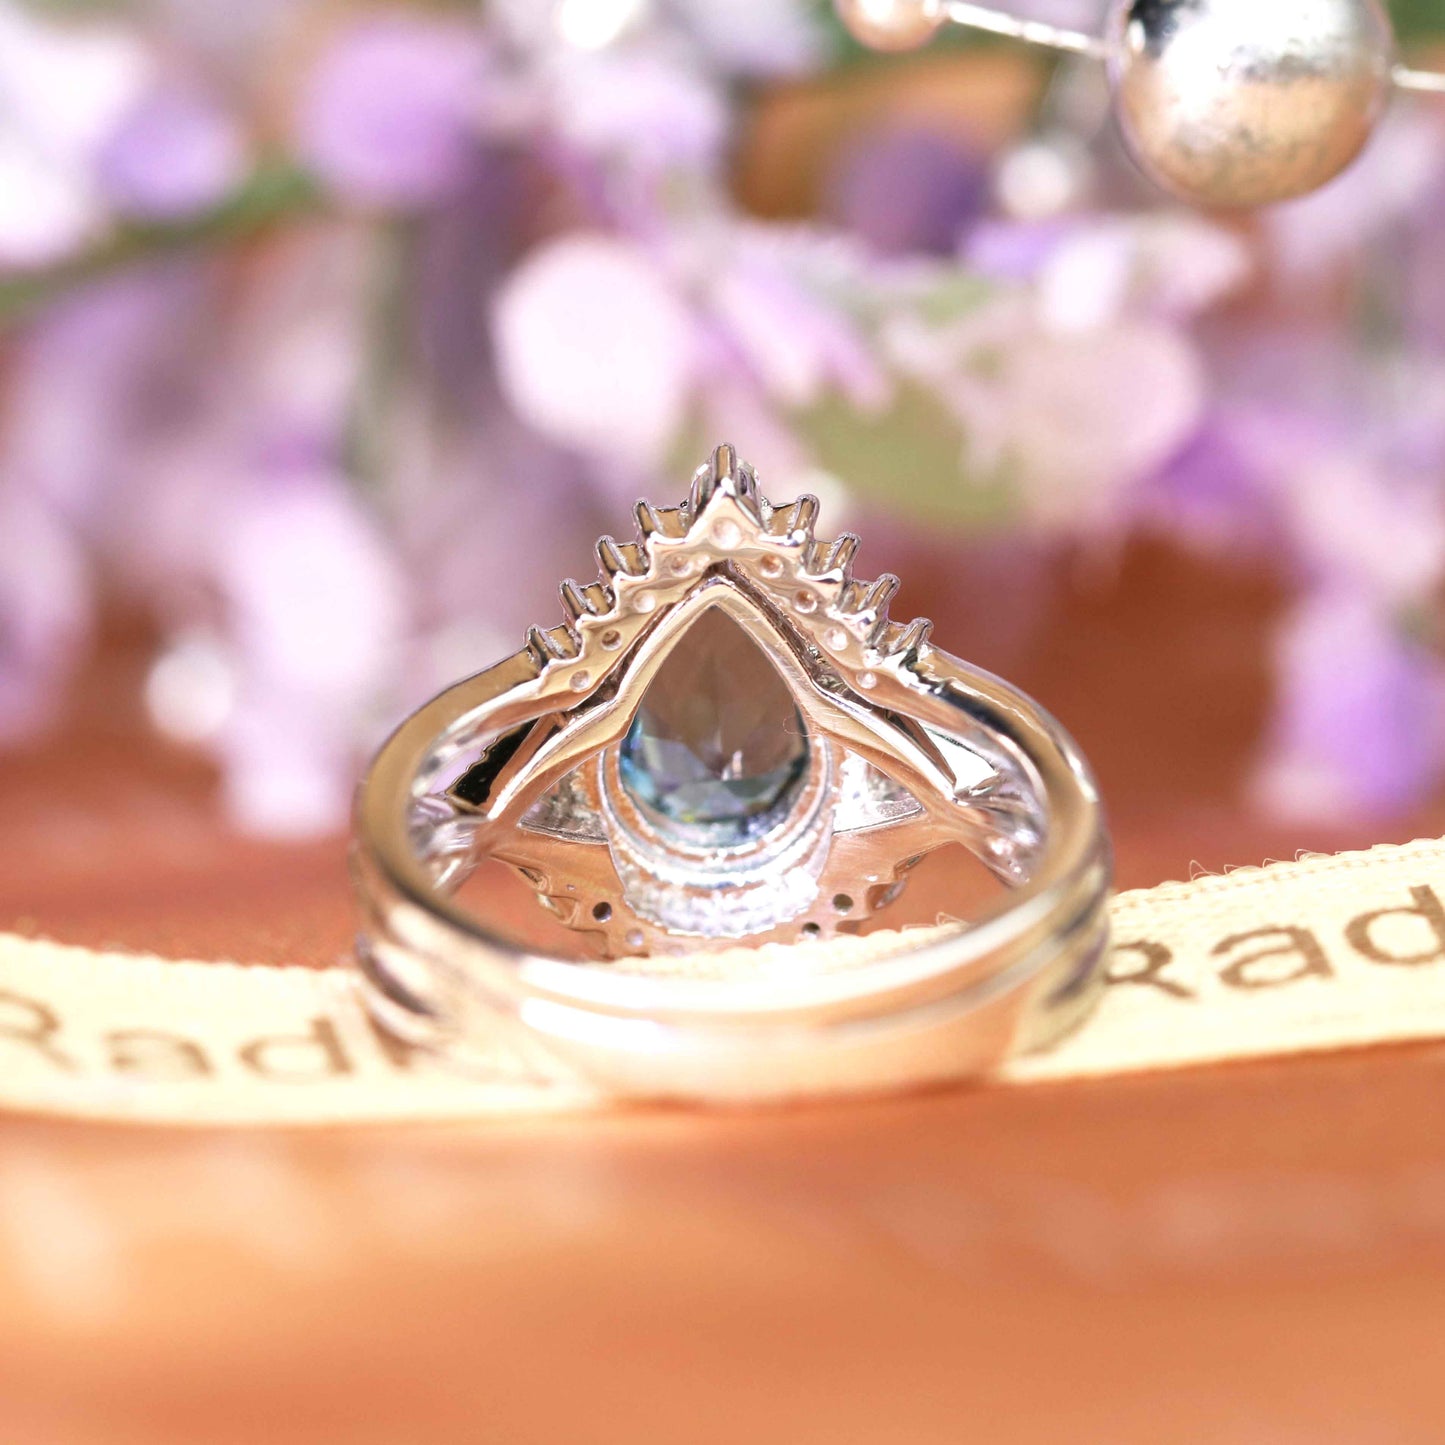 Magnificent 1.75 carat Pear Cut Alexandrite and Diamond 2 pcs. Nesting Engagement Ring Set in White Gold